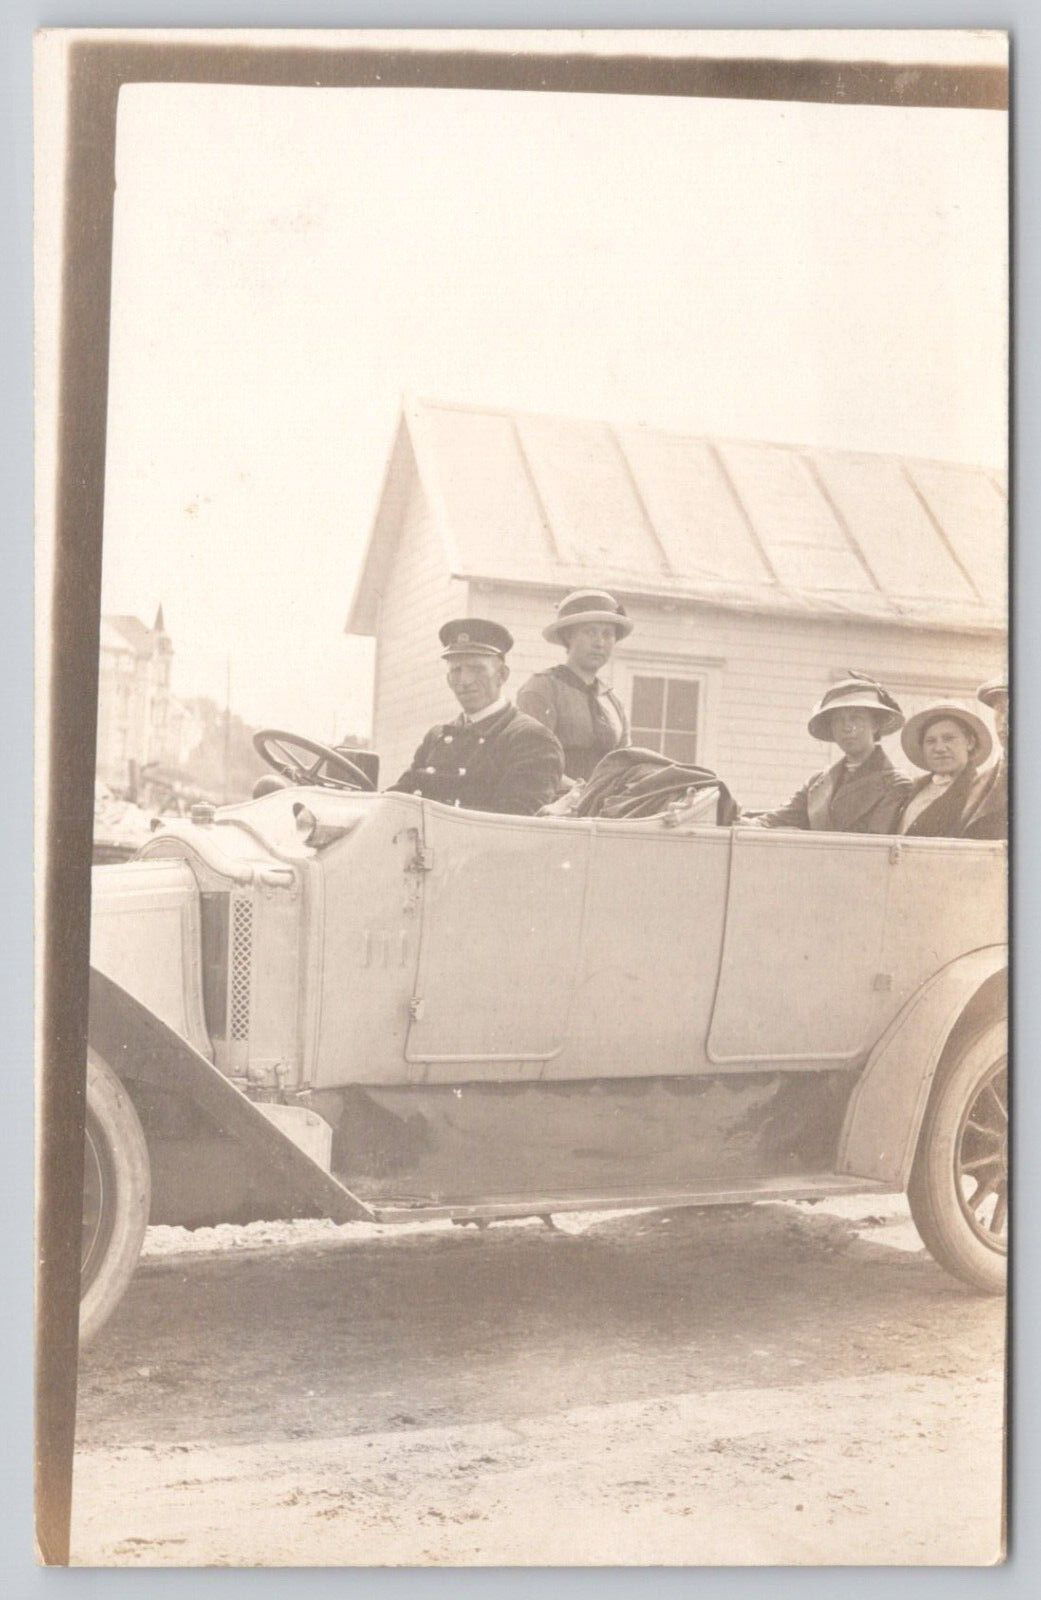 RPPC Postcard Women In Vintage Convertible Car With Chauffeur Real Photo